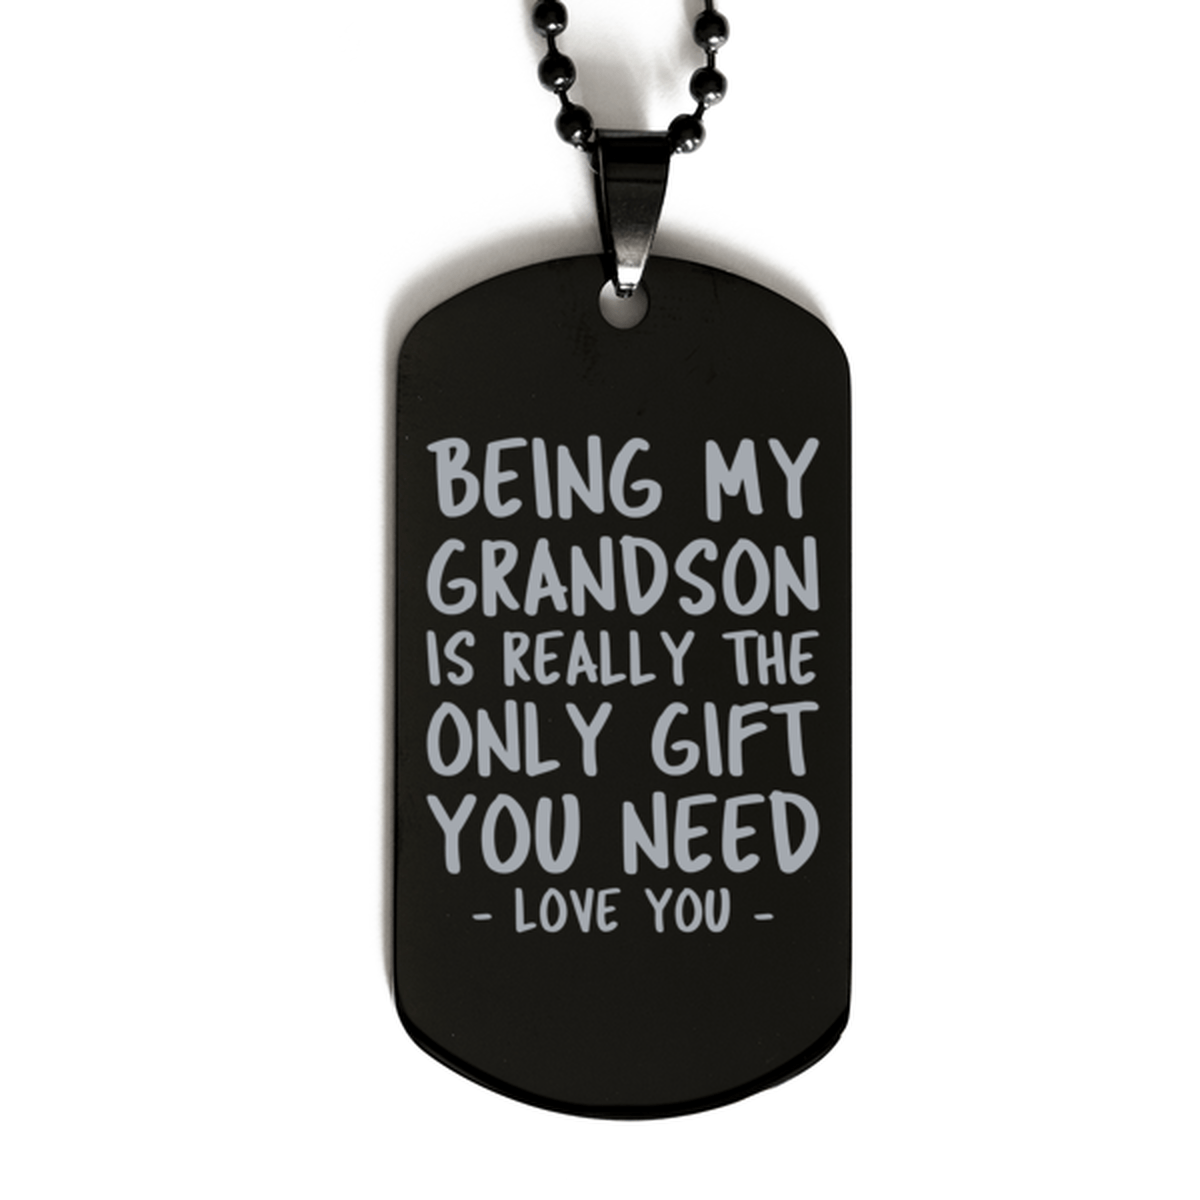 Funny Grandson Black Dog Tag Necklace, Being My Grandson Is Really the Only Gift You Need, Best Birthday Gifts for Grandson